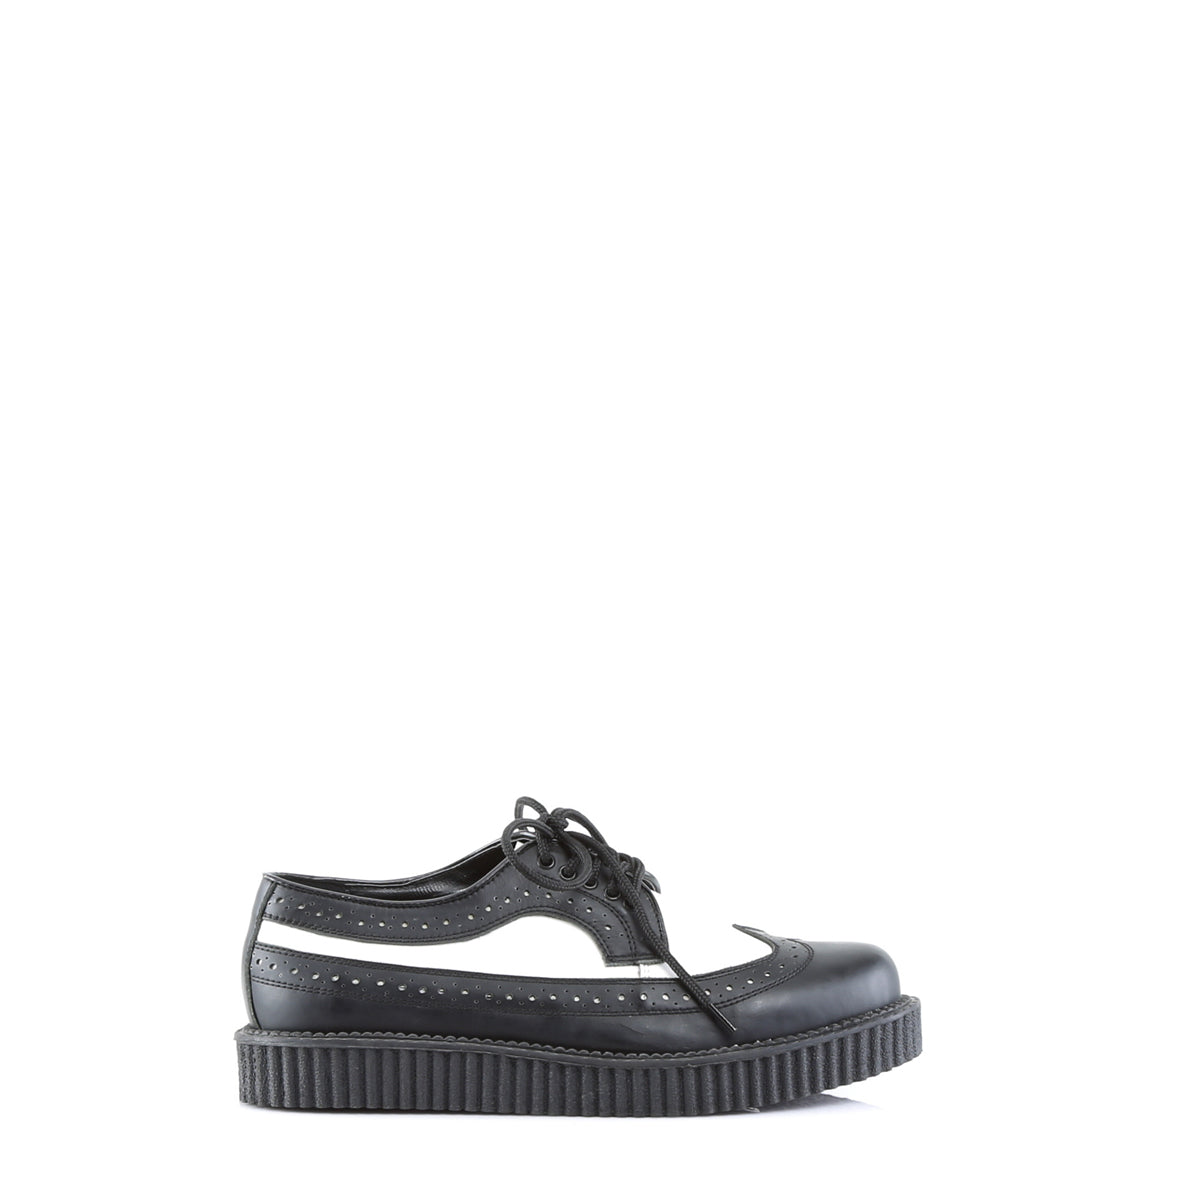 DemoniaCult Mens Low Shoe CREEPER-608 Blk-Wht Leather